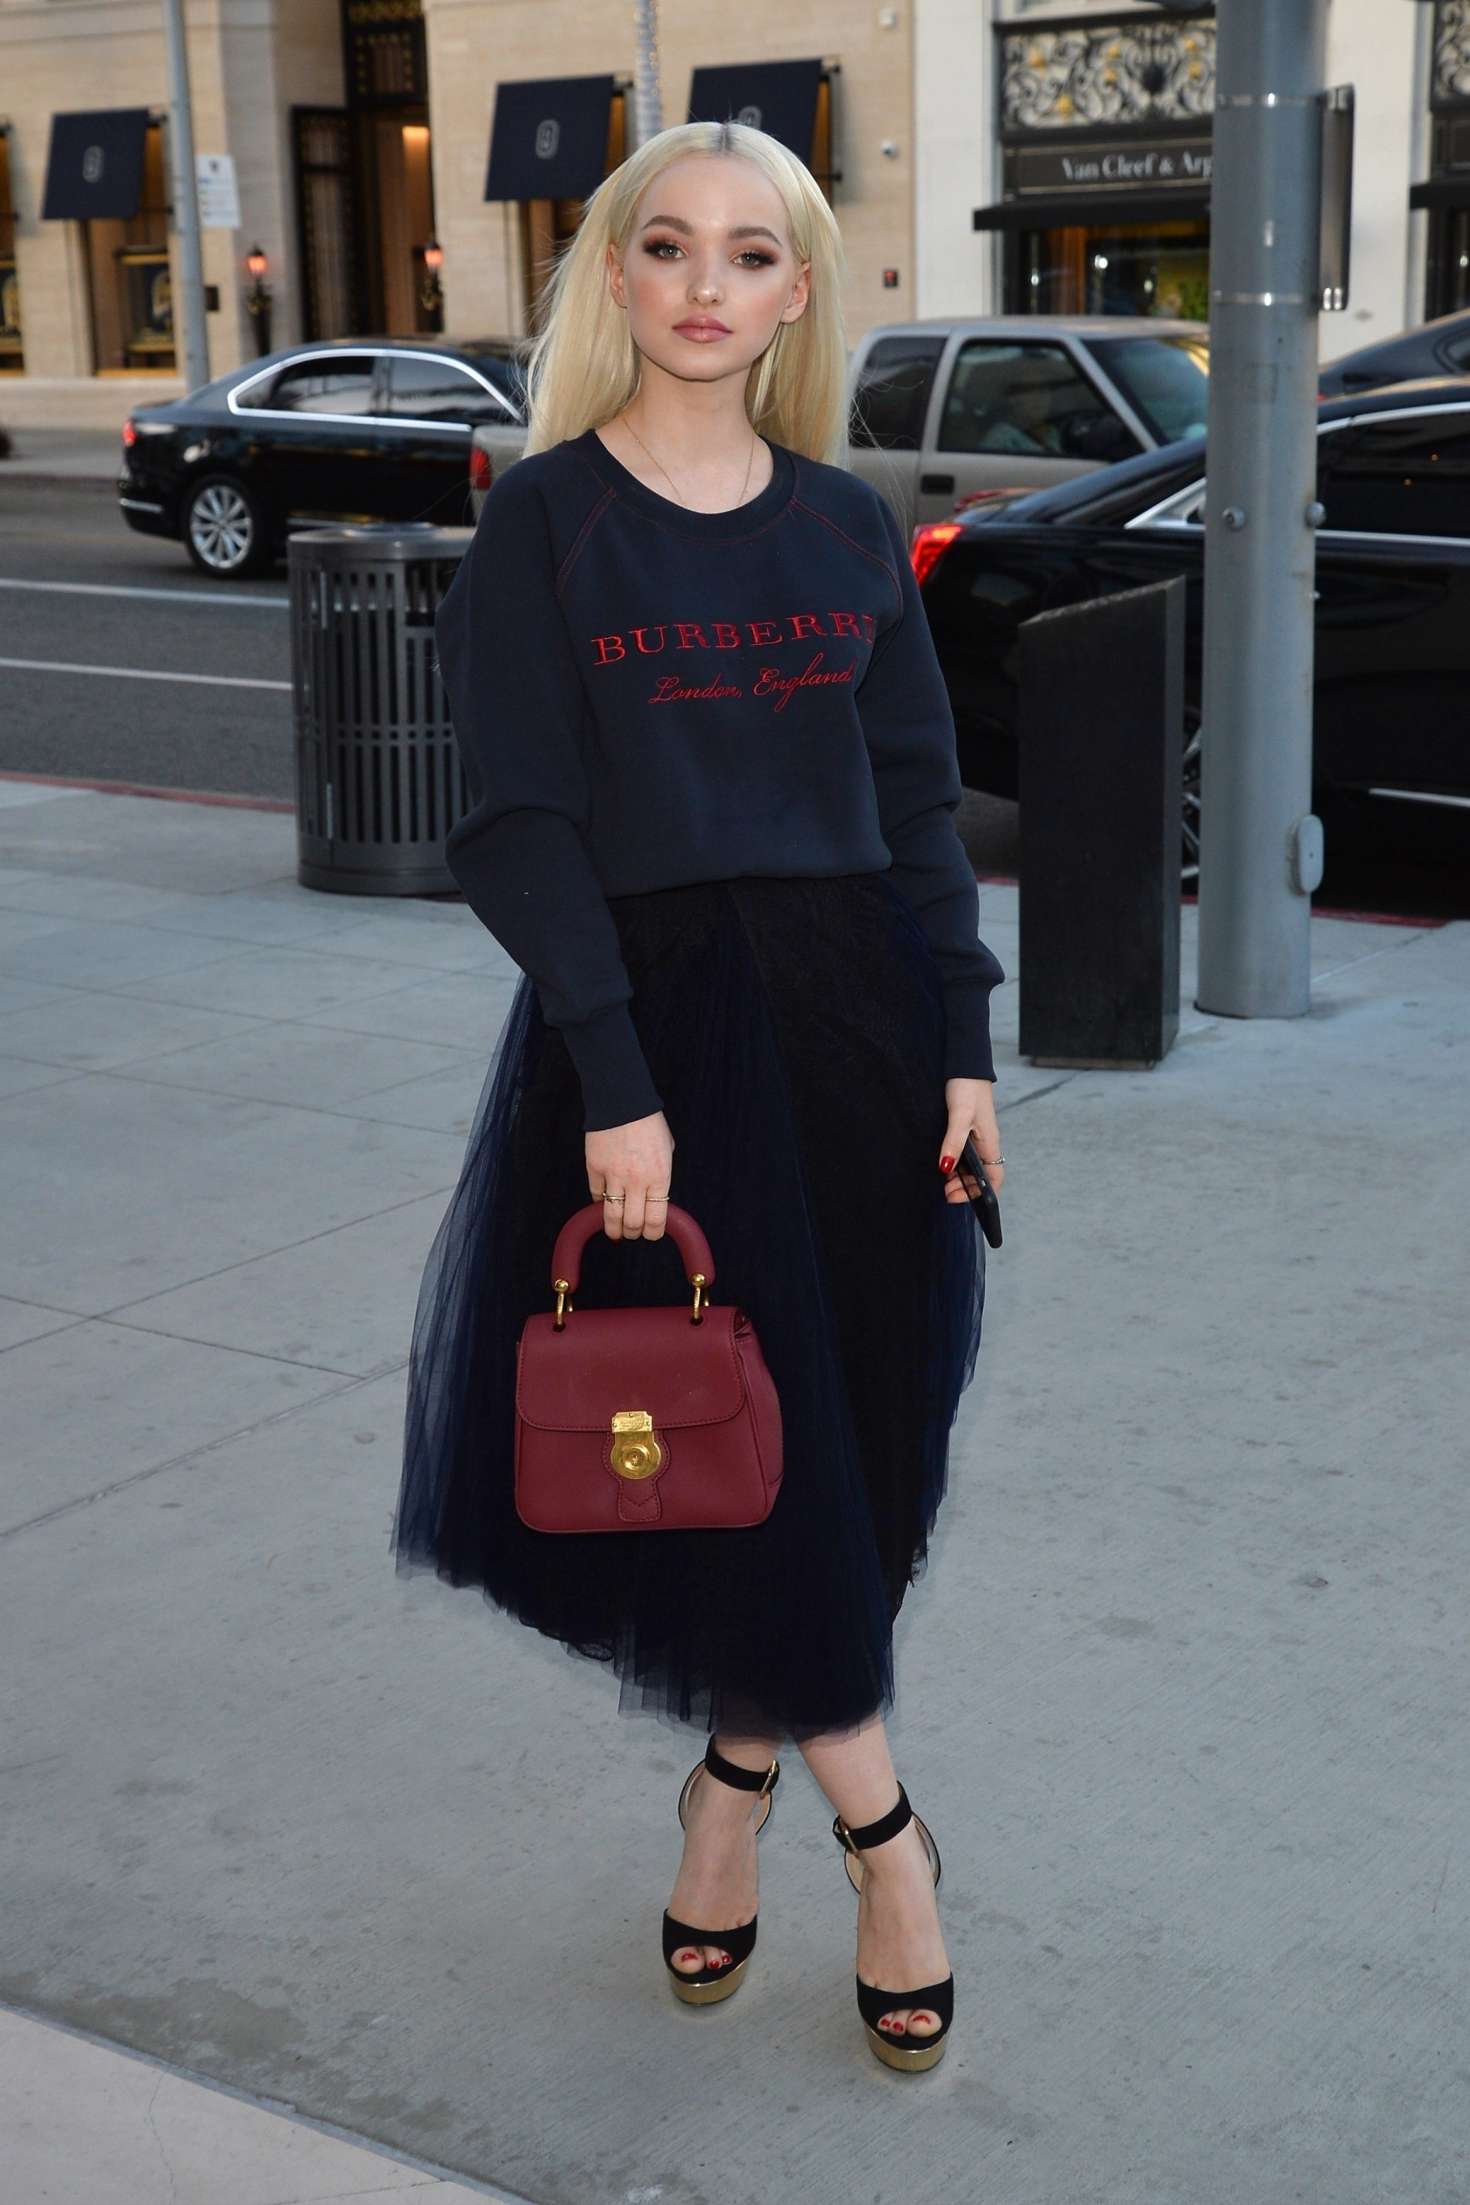 Dove Cameron â€“ Arrives at a party at the Rodeo Drive Burberry store in Beverly Hills